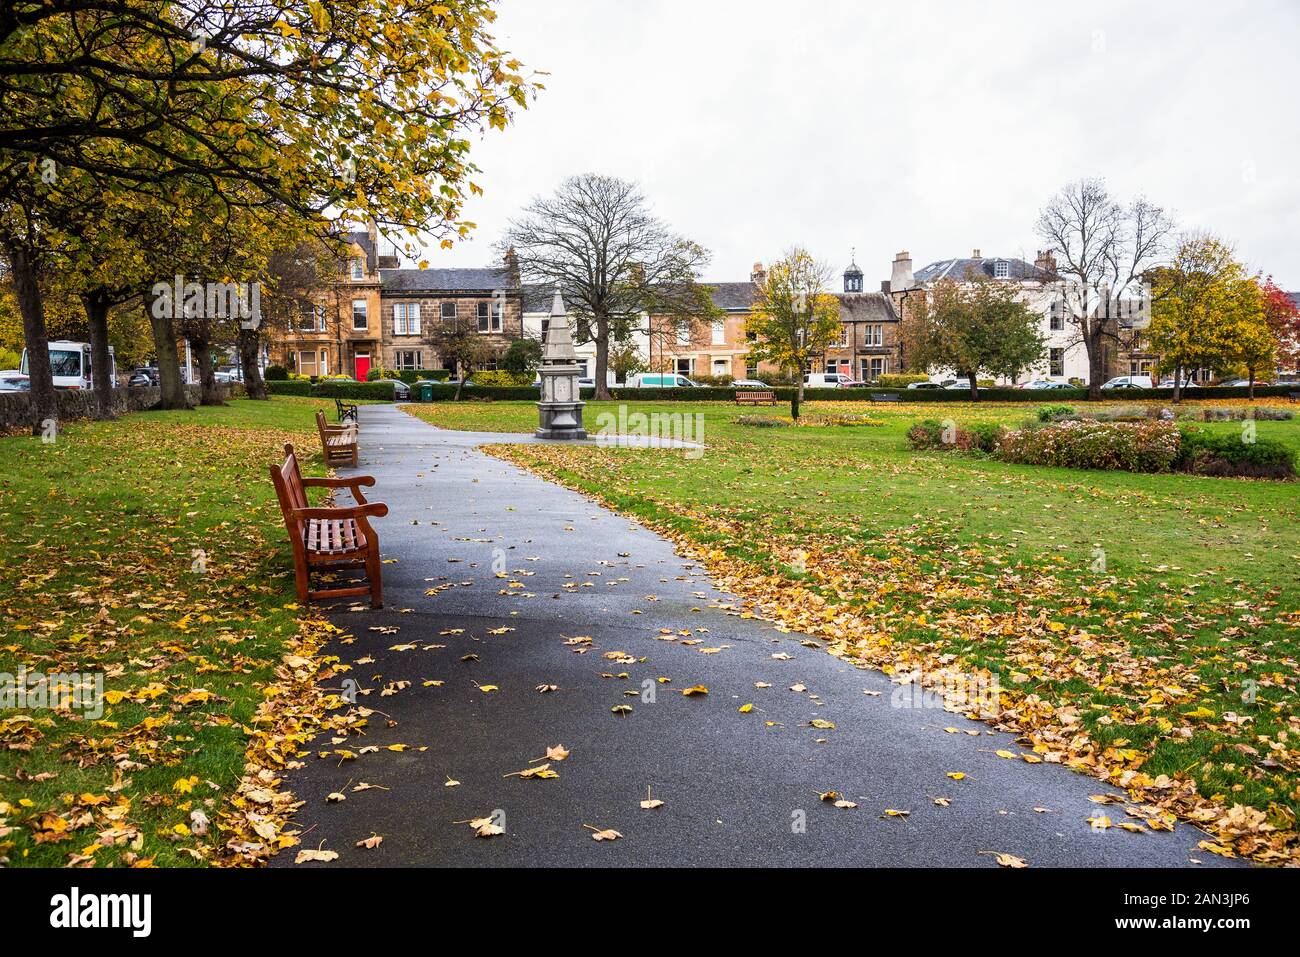 Garden with a path lined with wooden benches and deciduous trees in a residential district on a cloudy autumn day Stock Photo